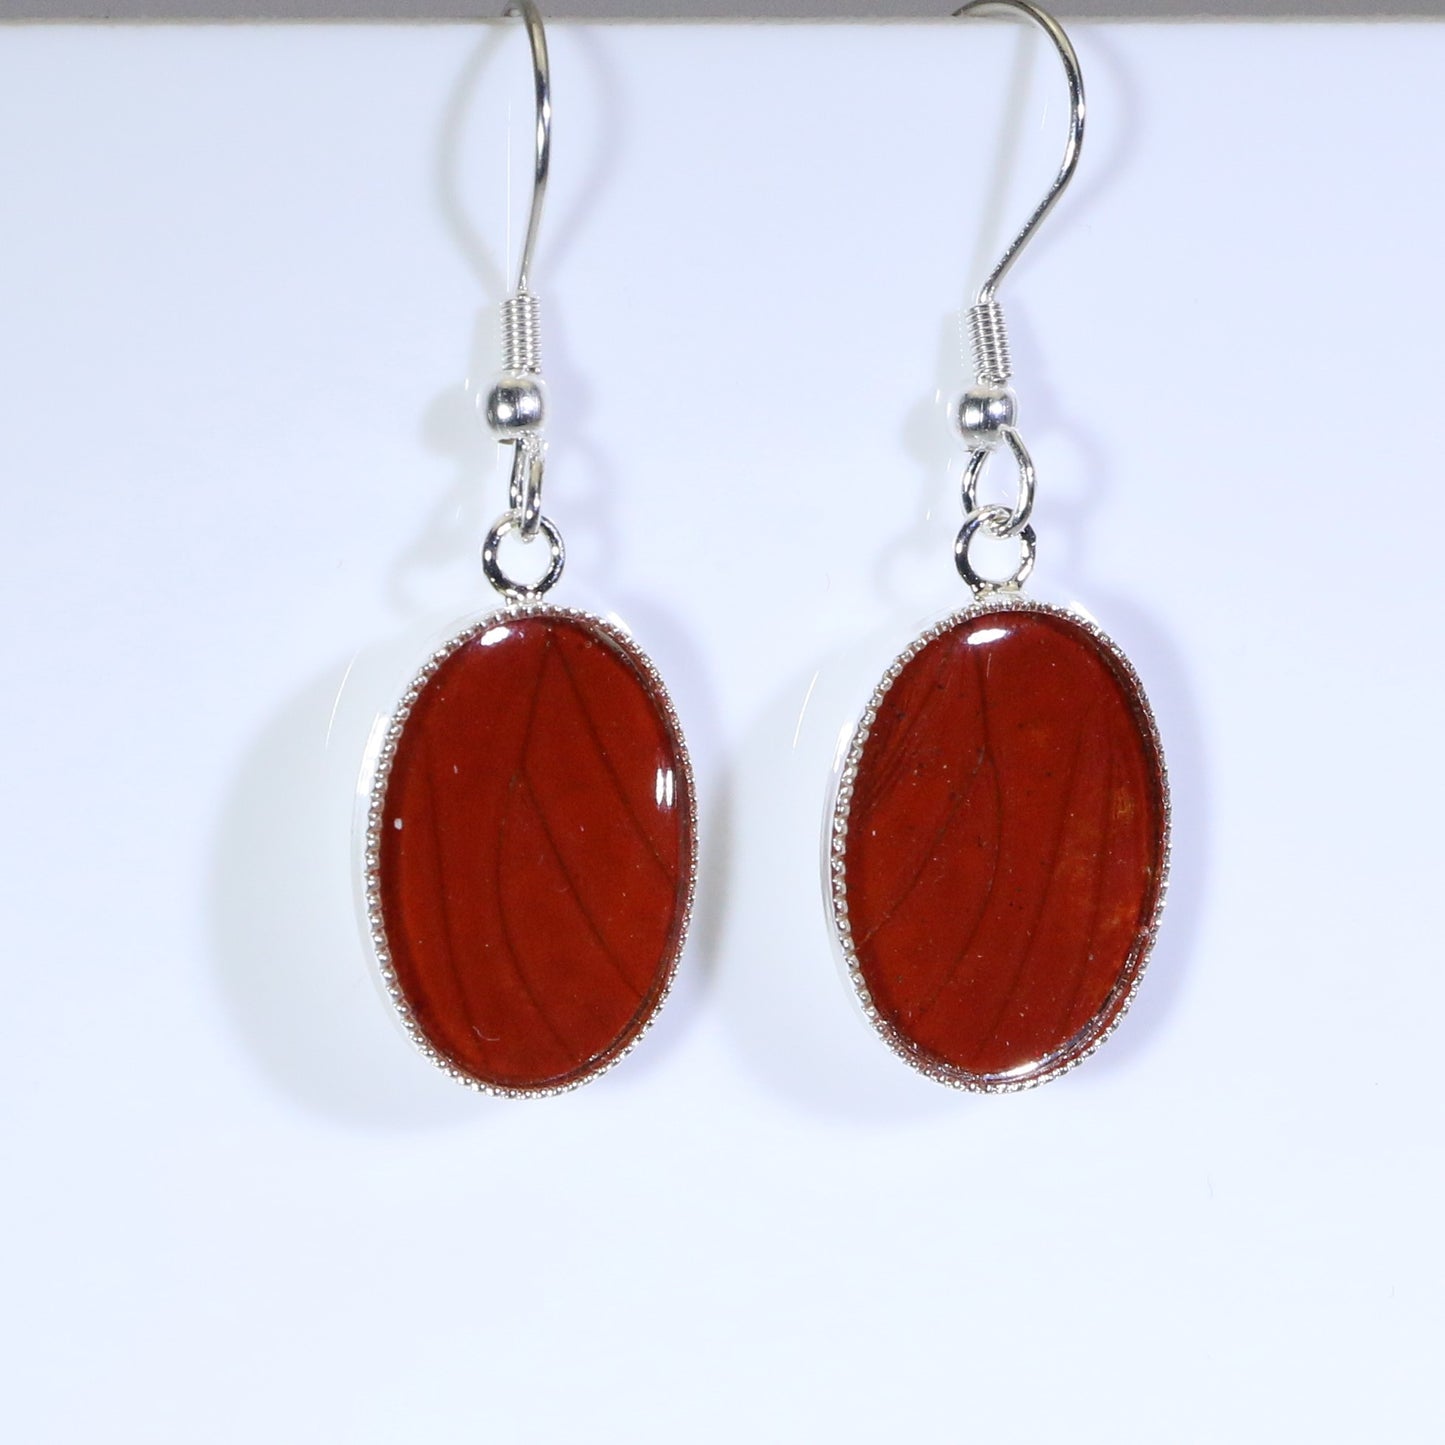 51108 - Real Butterfly Wing Jewelry - Earrings - Small - Red Glider